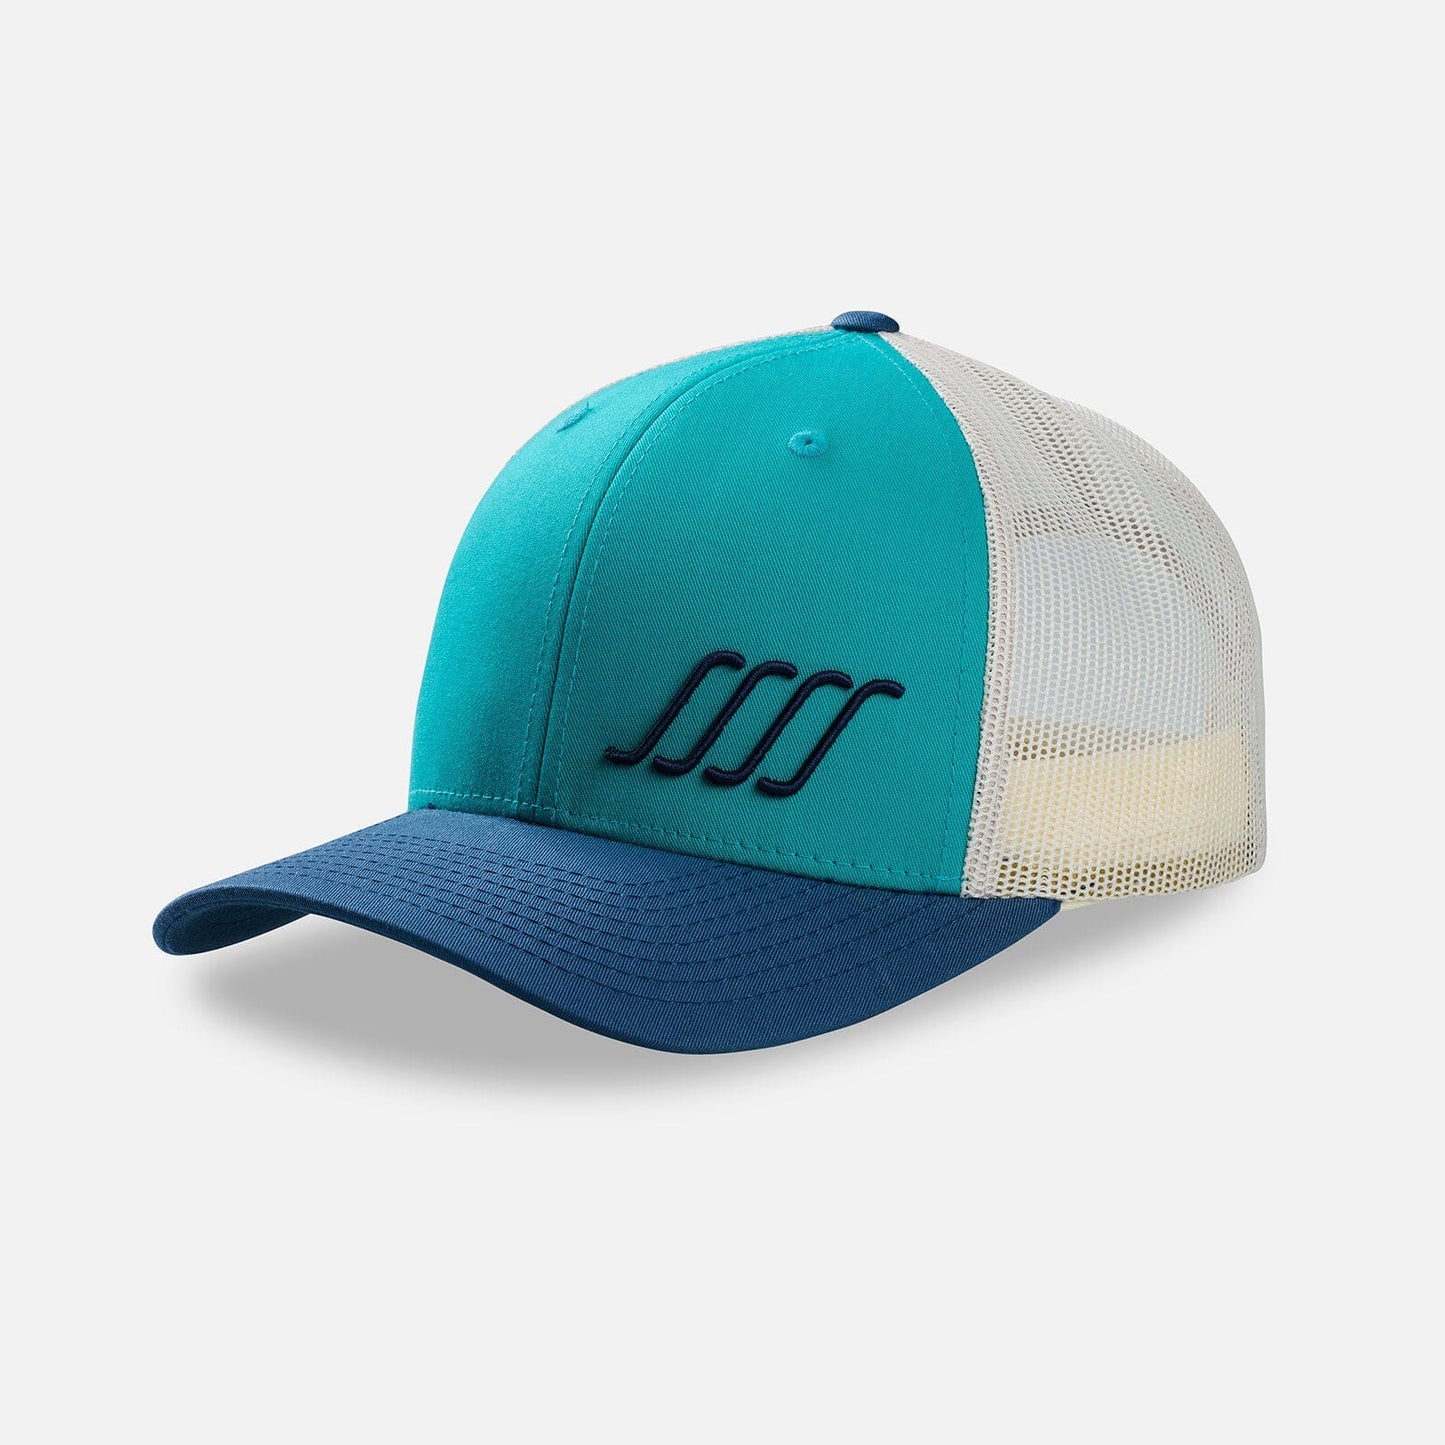 South Swell SSSS Embroidered Trucker Hat Hats SOUTH SWELL Teal / Birch / Lt Navy 